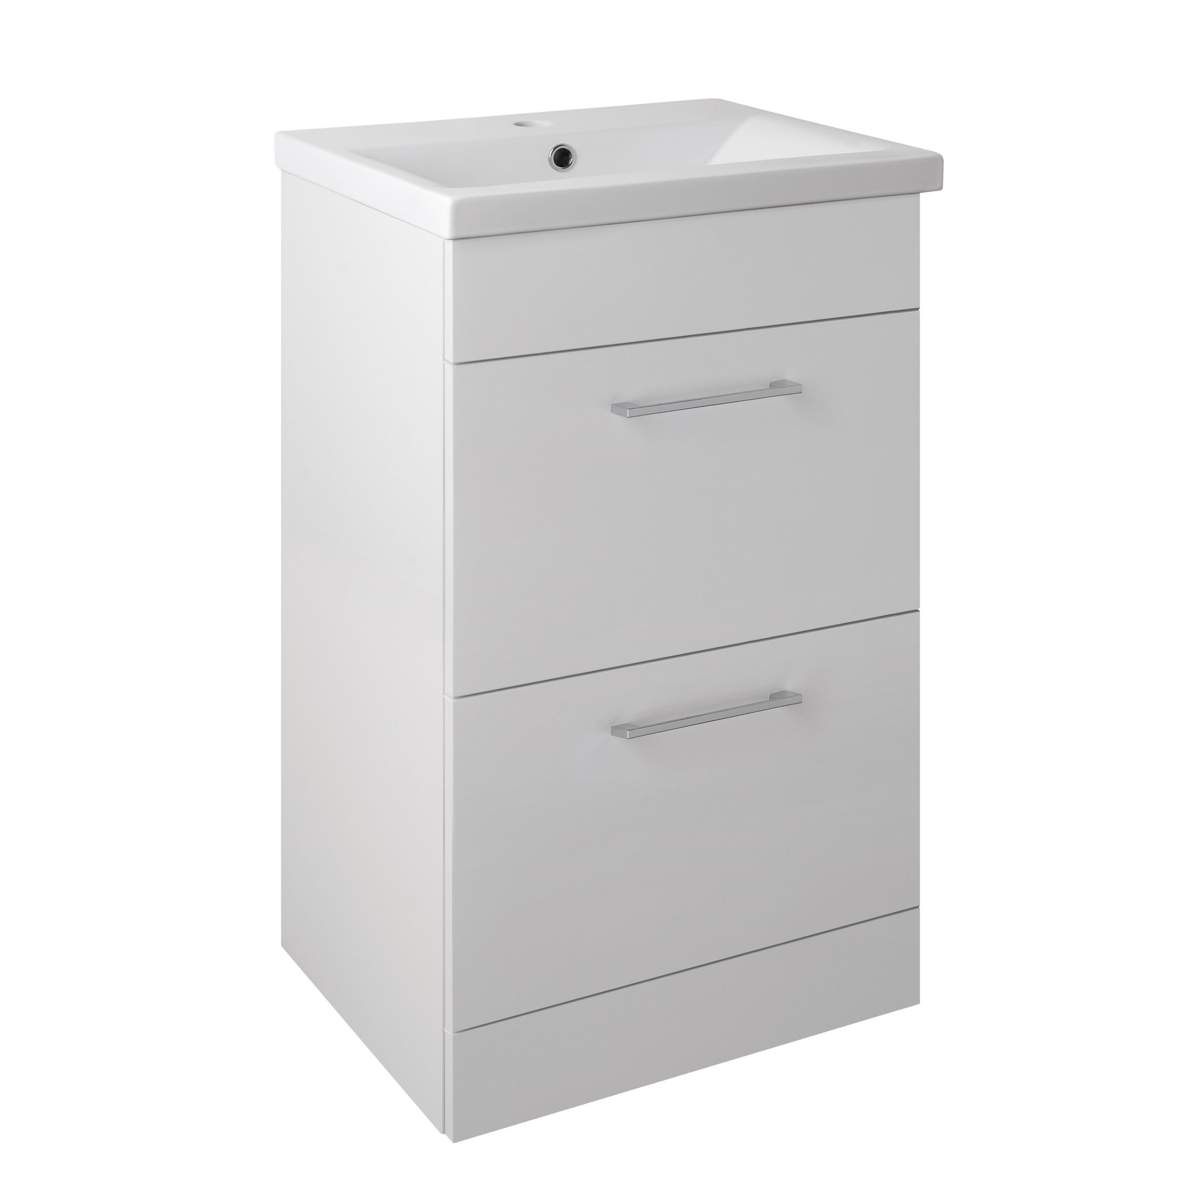 JTP Pace Units 500mm Floor Standing Unit with Drawers and Basin in White